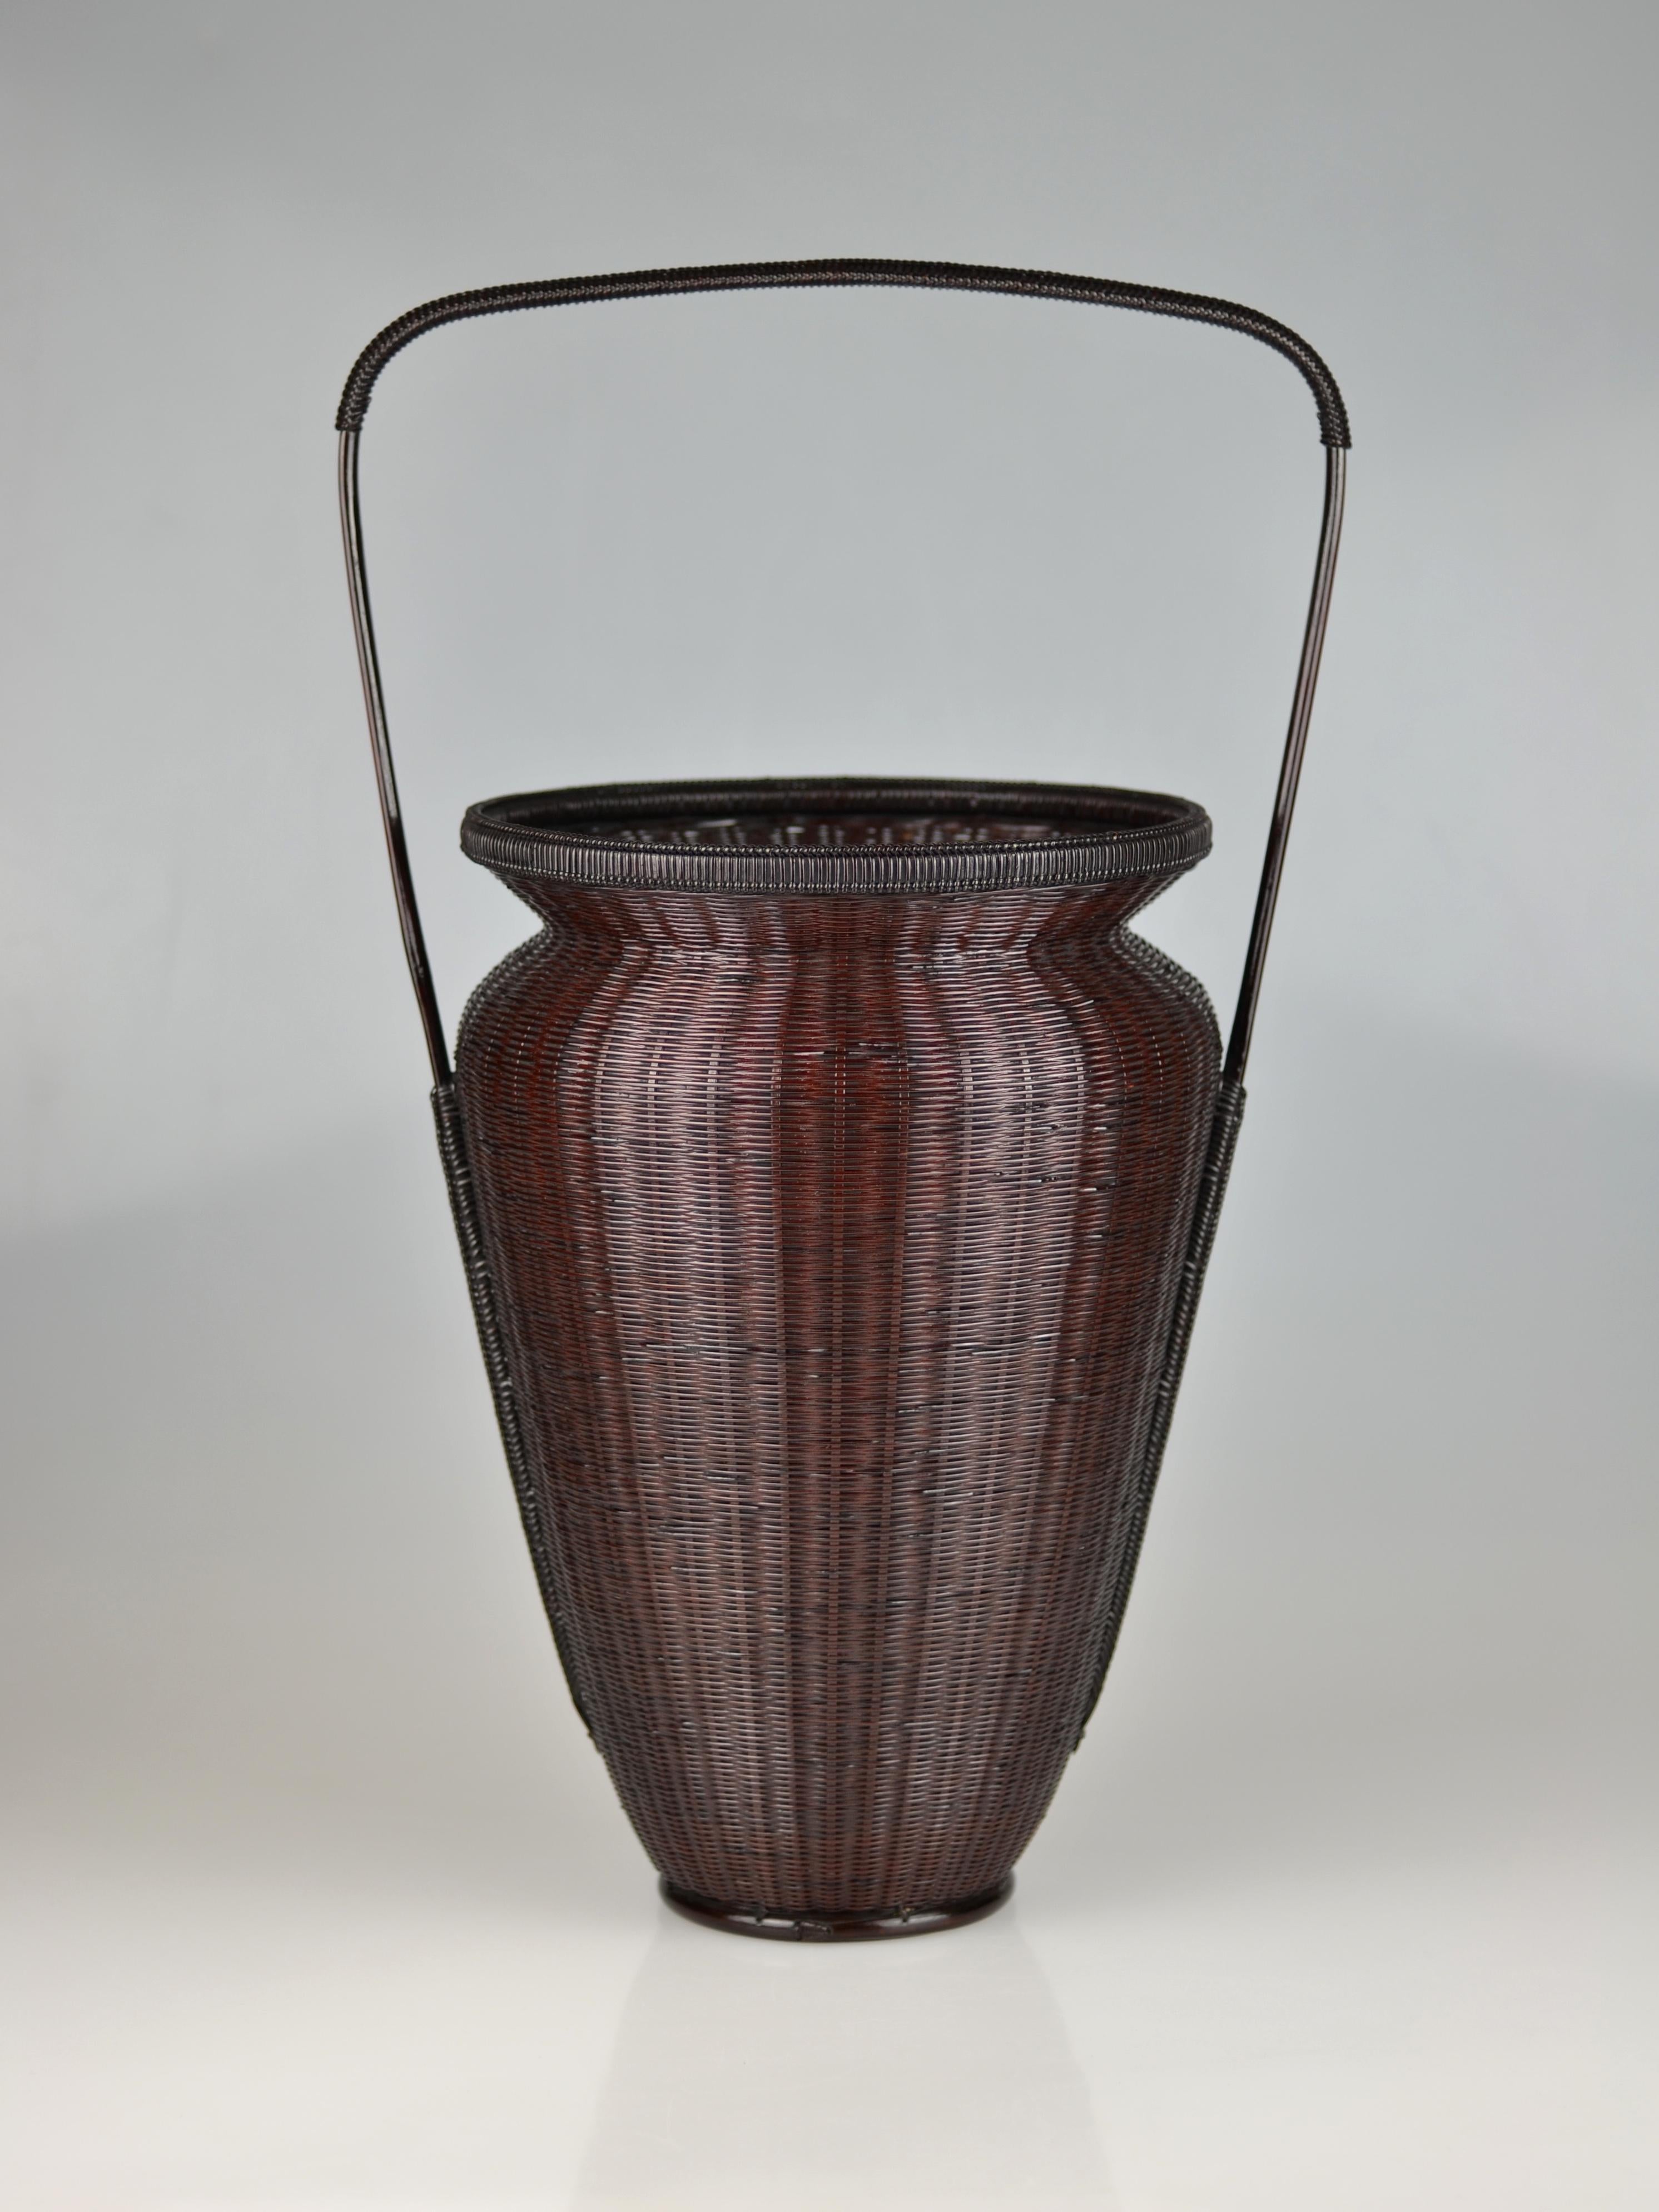 Showa Traditional Japanese Bamboo Flower Basket by Tanabe Chikuunsai II For Sale